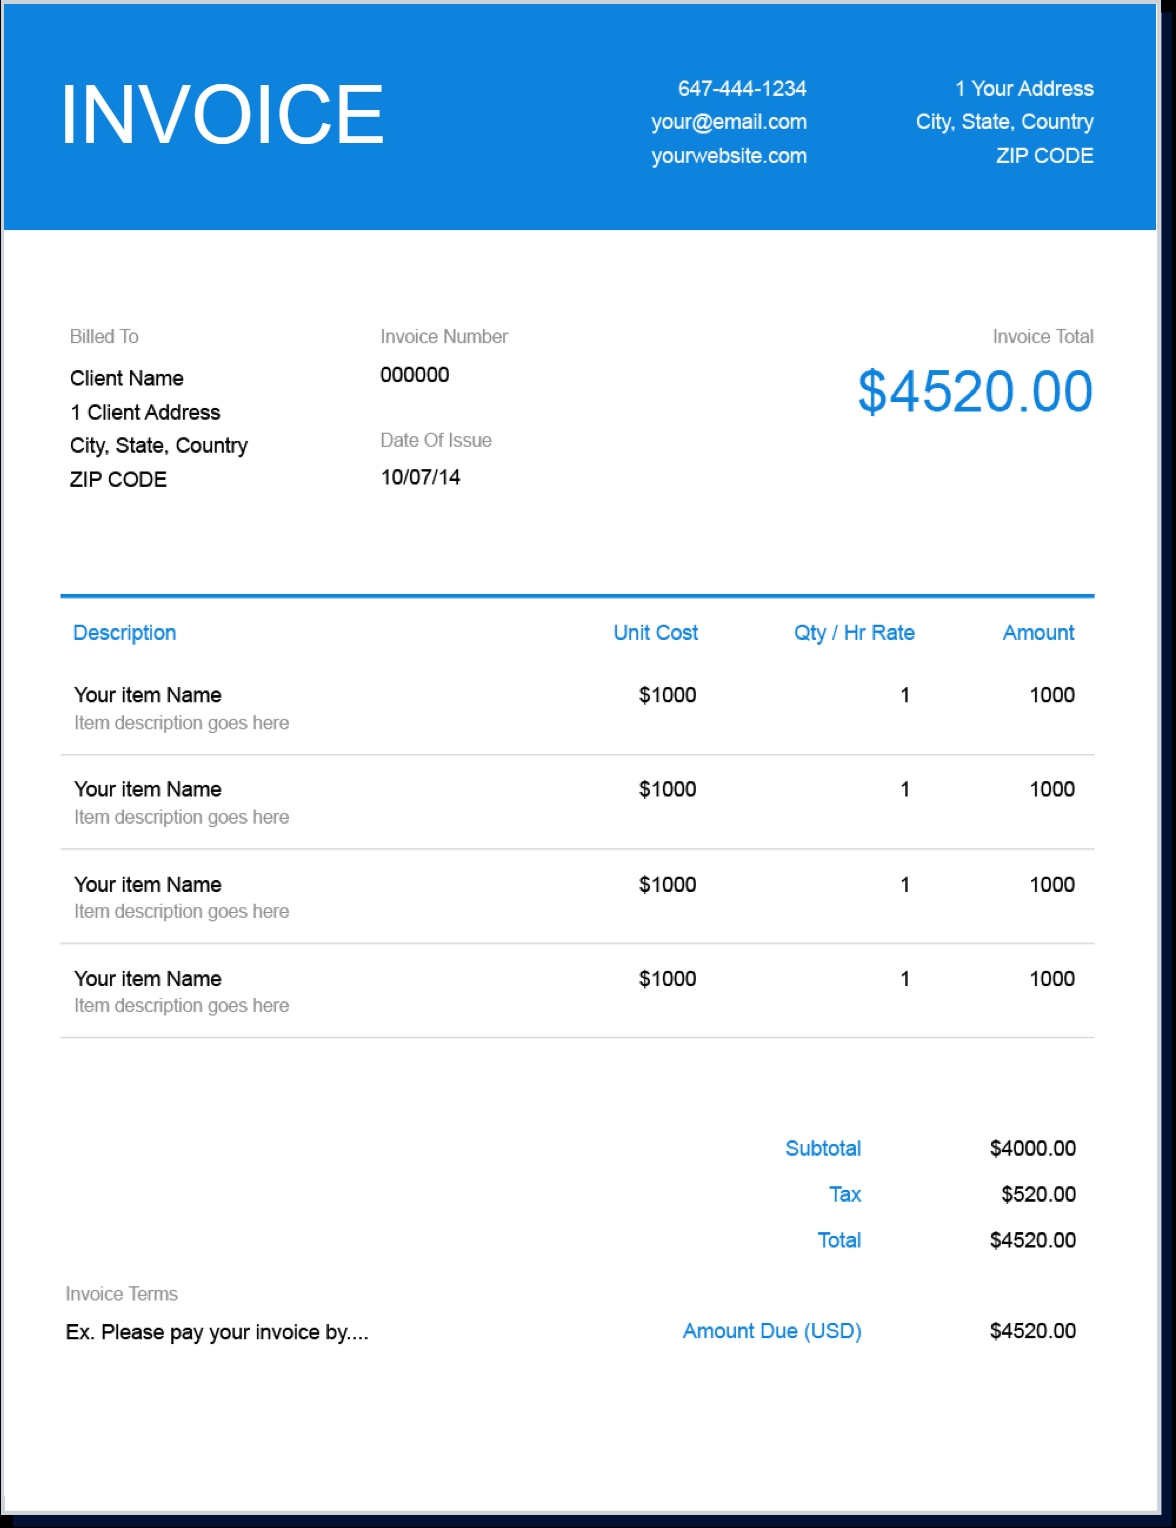 invoice template create and send free invoices instantly copiers repairs invoice template